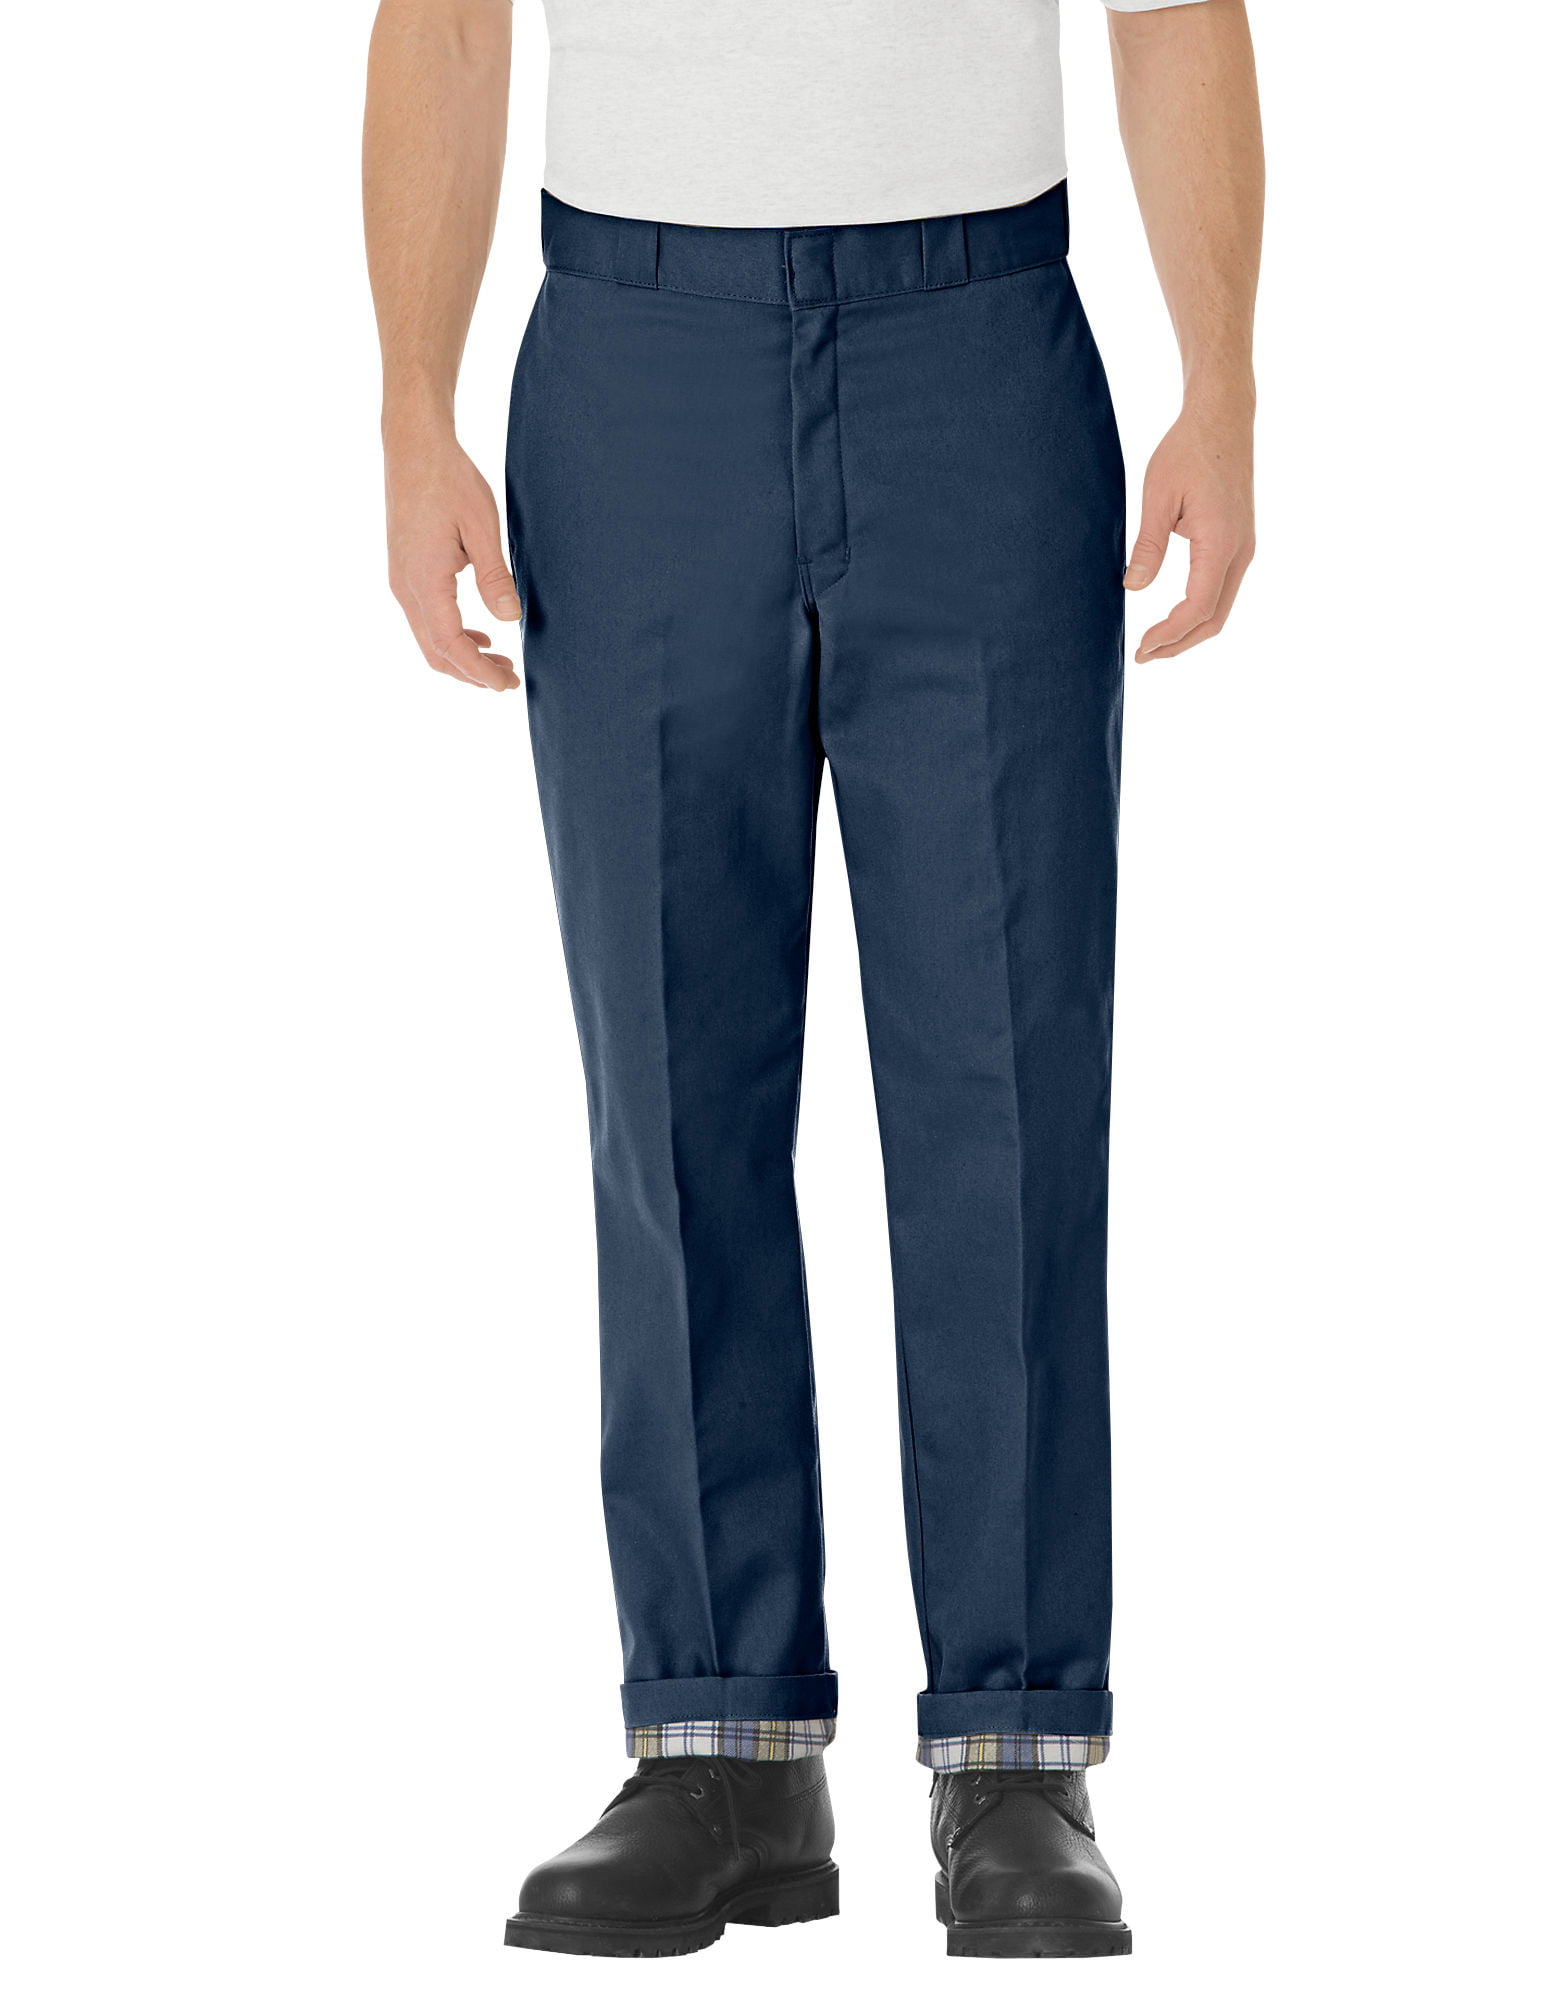 Aggregate more than 67 dickies flannel lined pants latest - in.eteachers